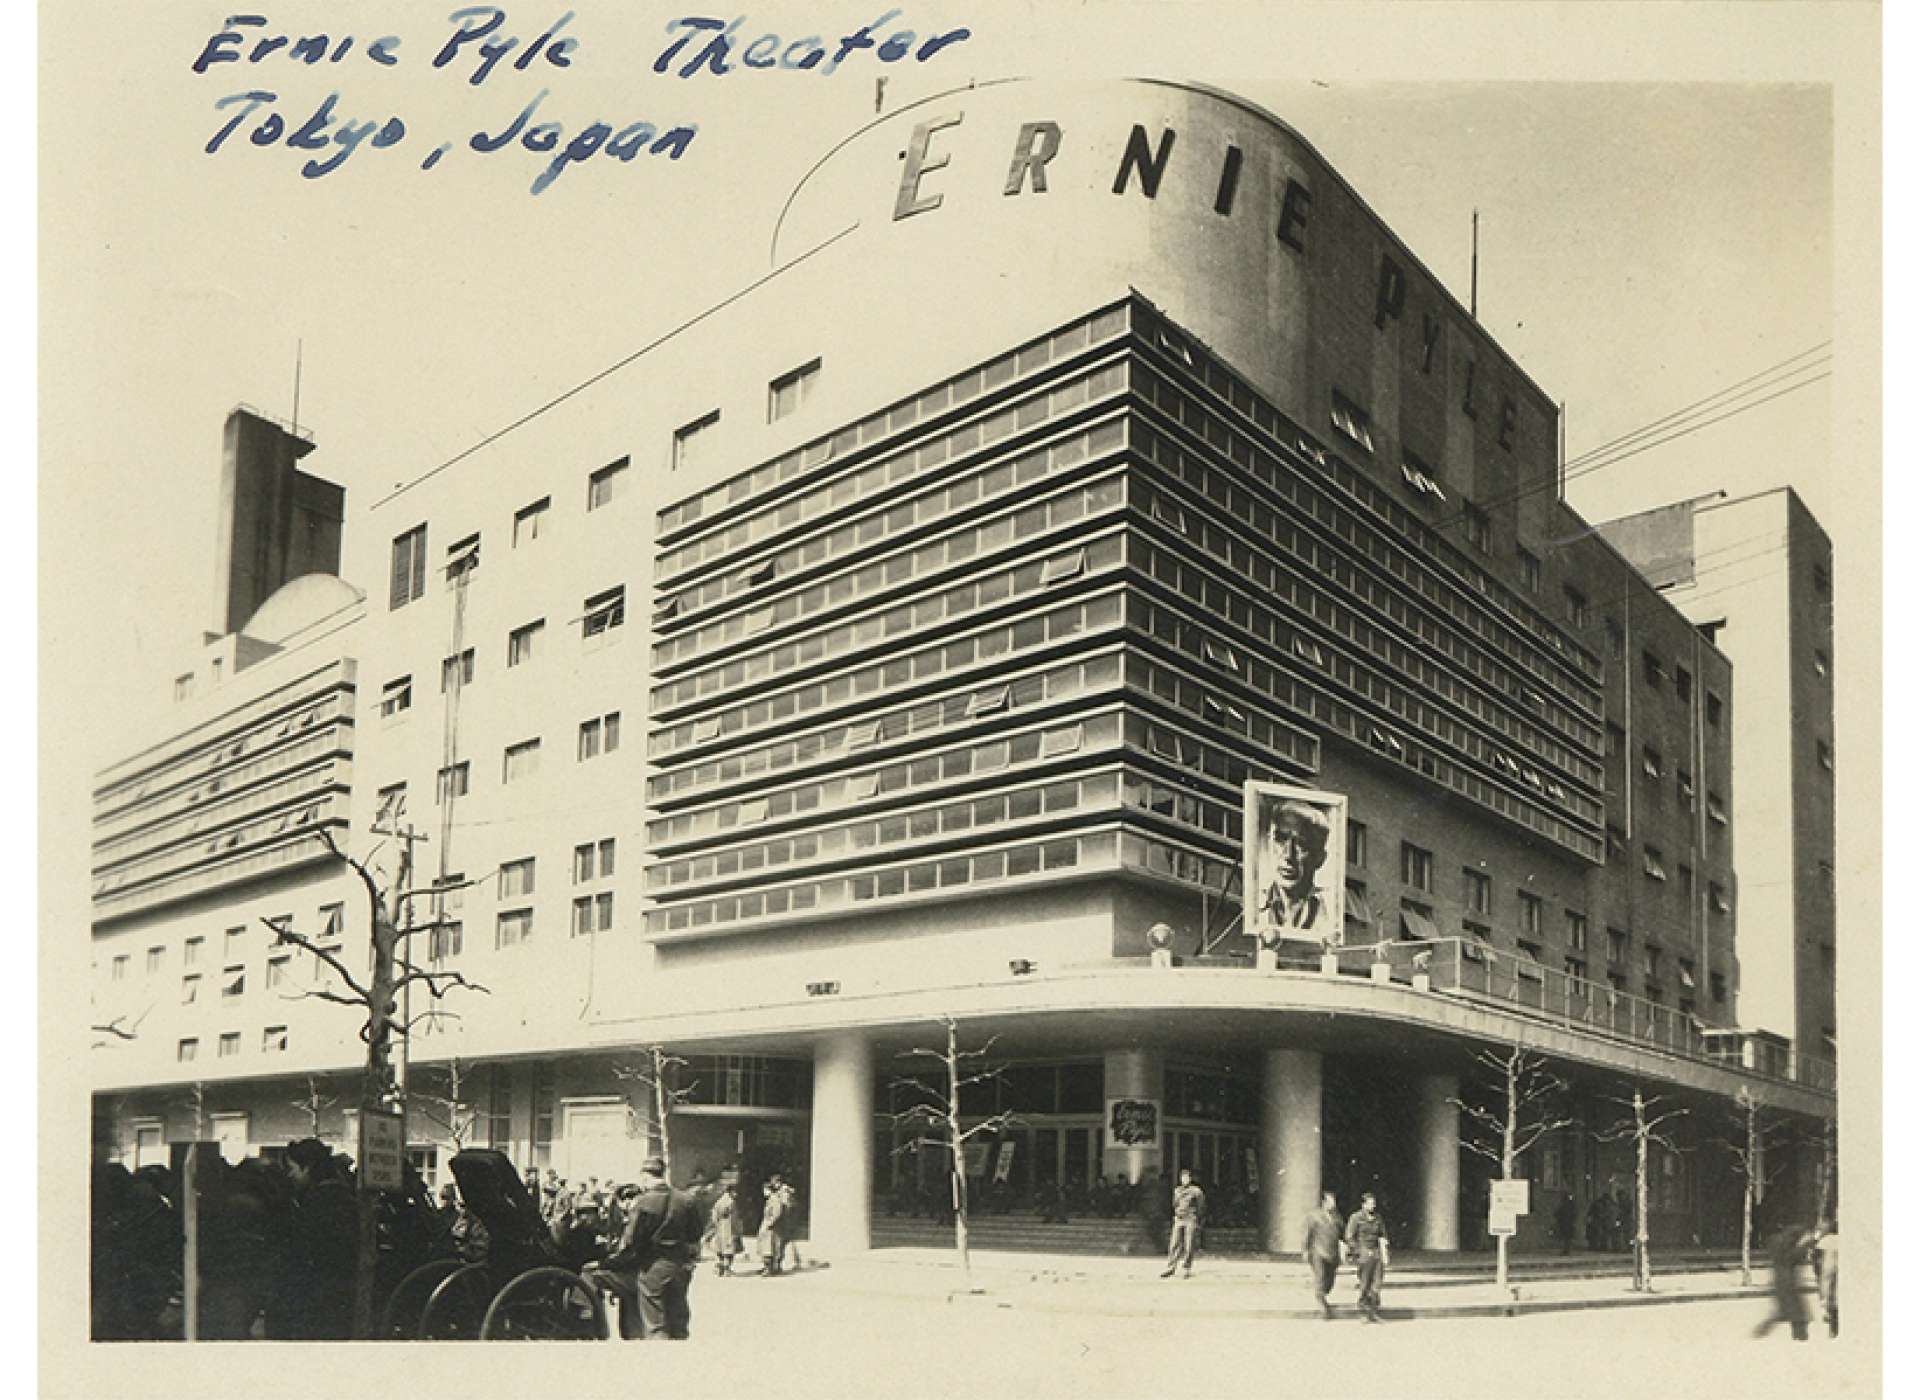 The Ernie Pyle Theater in Tokyo, Japan where US occupying forces enjoyed various forms of entertainment. &quot;Ernie Pyle Theater, Tokyo Japan,&quot; UHM Library Digital image, University of Hawai&#039;i at Manoa.